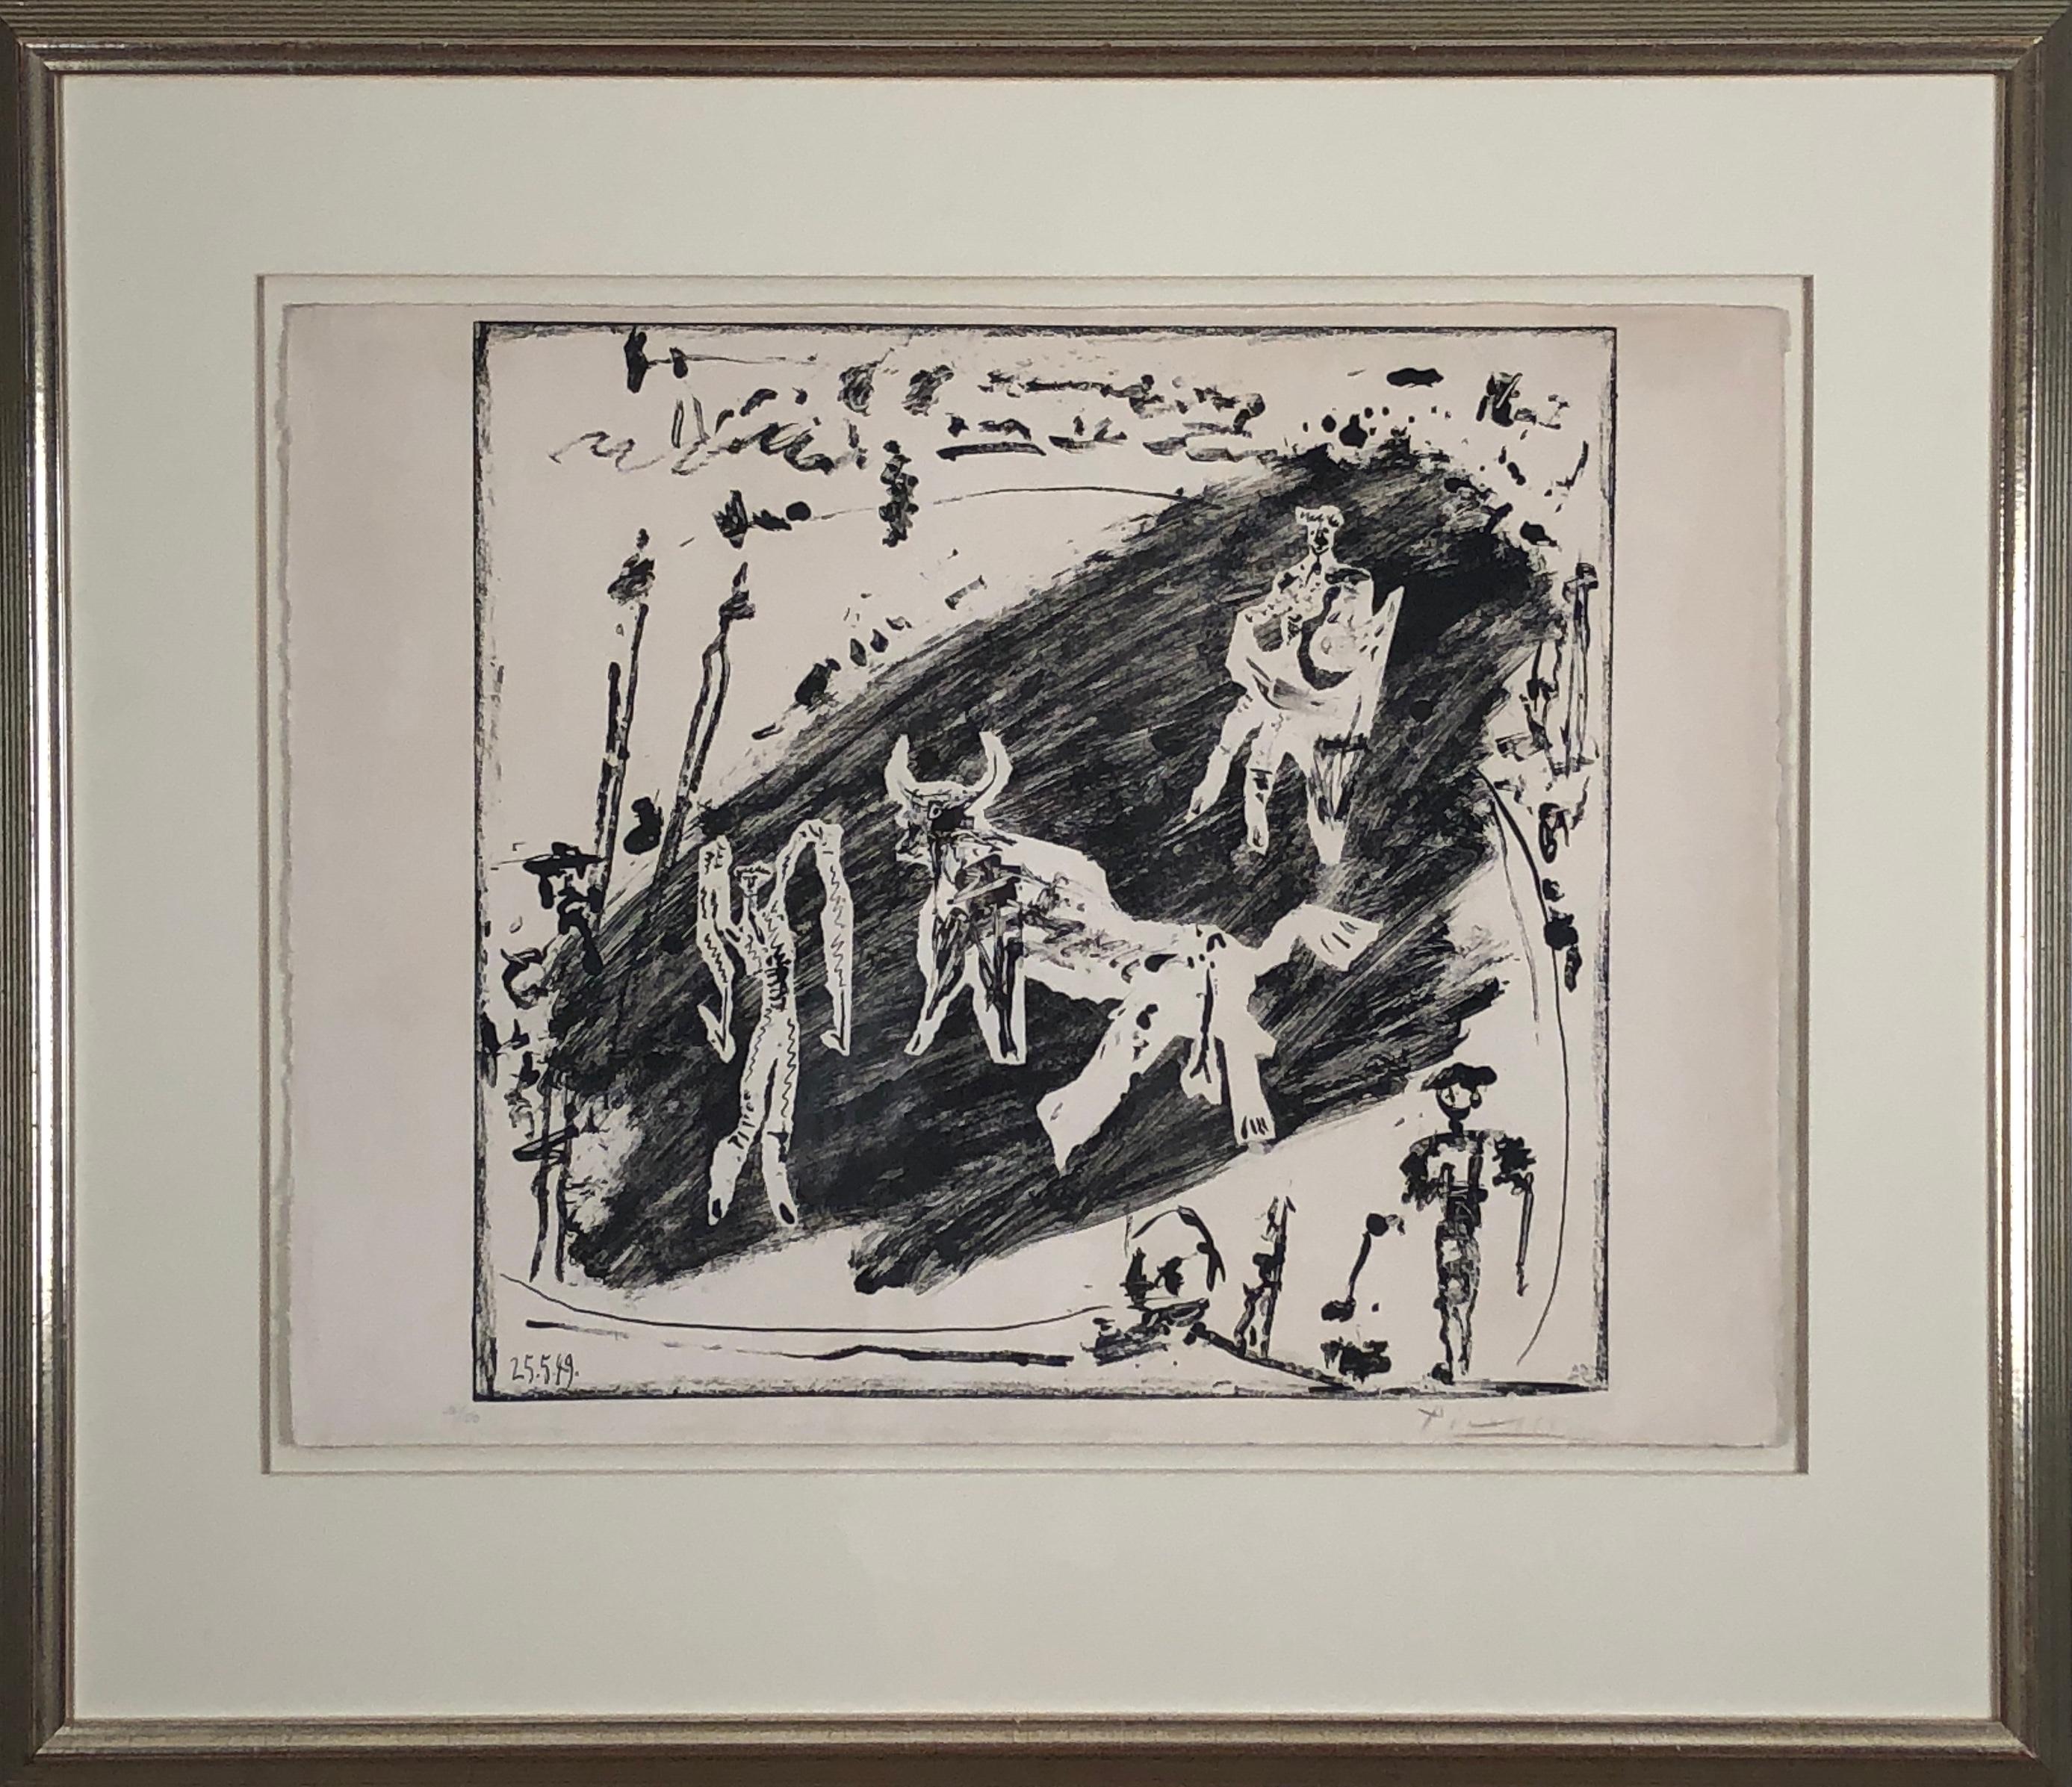 This piece is an original lithograph created by Pablo Picasso in 1949. It is hand signed and numbered from the edition of 50. The frame measures 31 x 36 inches, the sheet measures 28 x 33 inches, the image measures 19 x 25 inches.This piece is